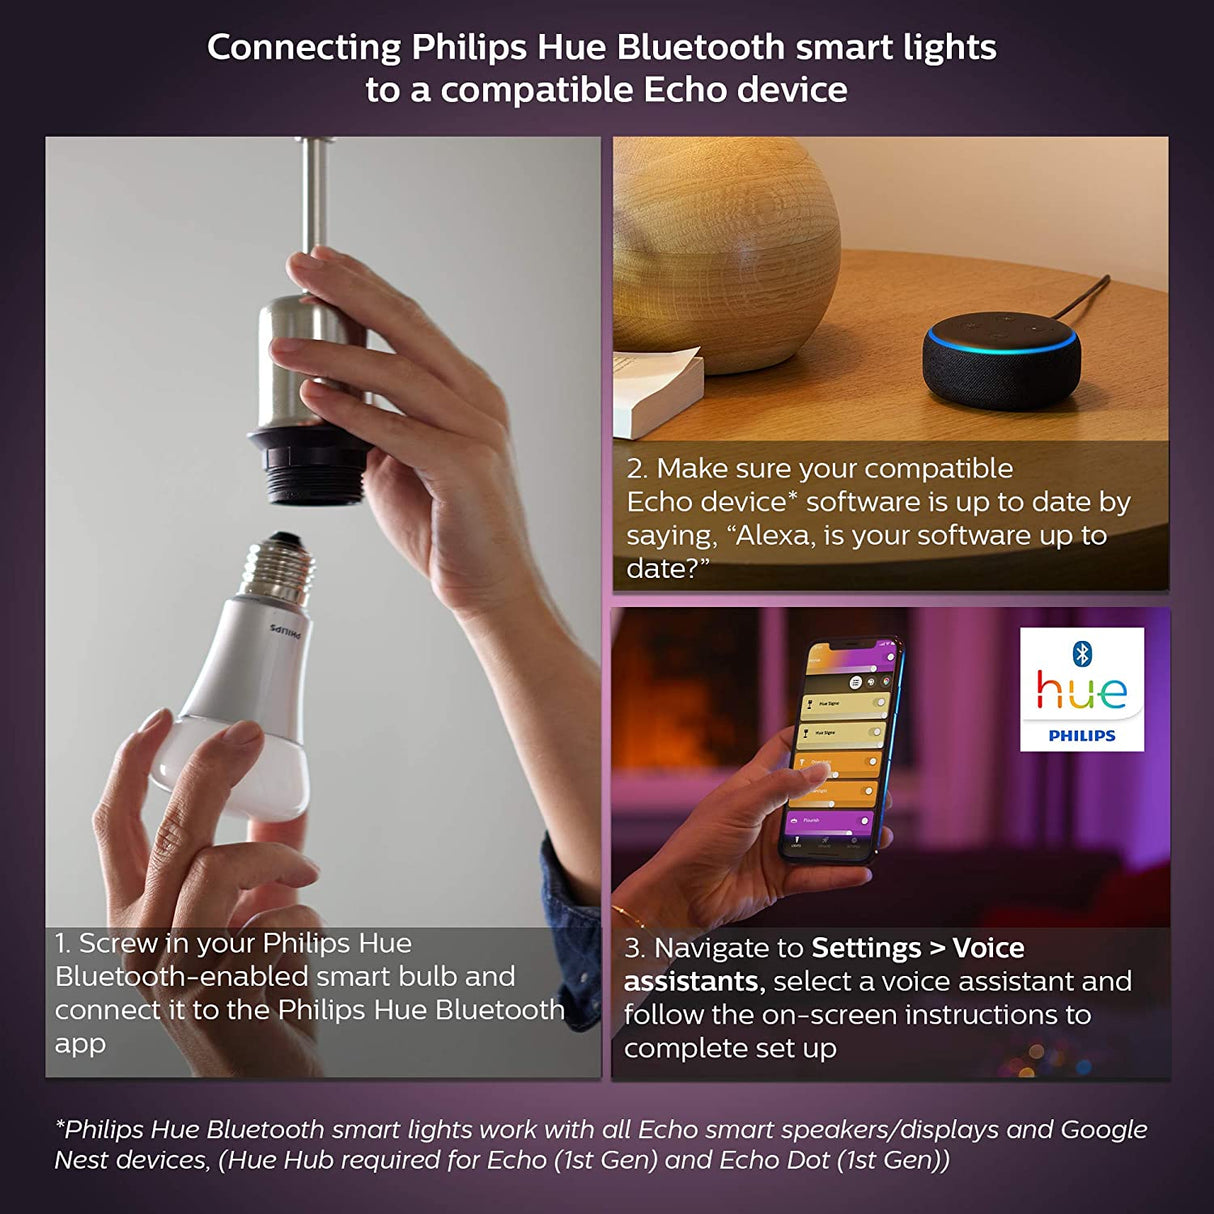 Philips Hue White &amp; Color E12 LED Candle Light Bulb, Bluetooth &amp; Zigbee Compatible (Hue Hub Optional), Works with Alexa &amp; Google Assistant 1 Count (Pack of 1) White and Color Ambiance (16 Million Colors)